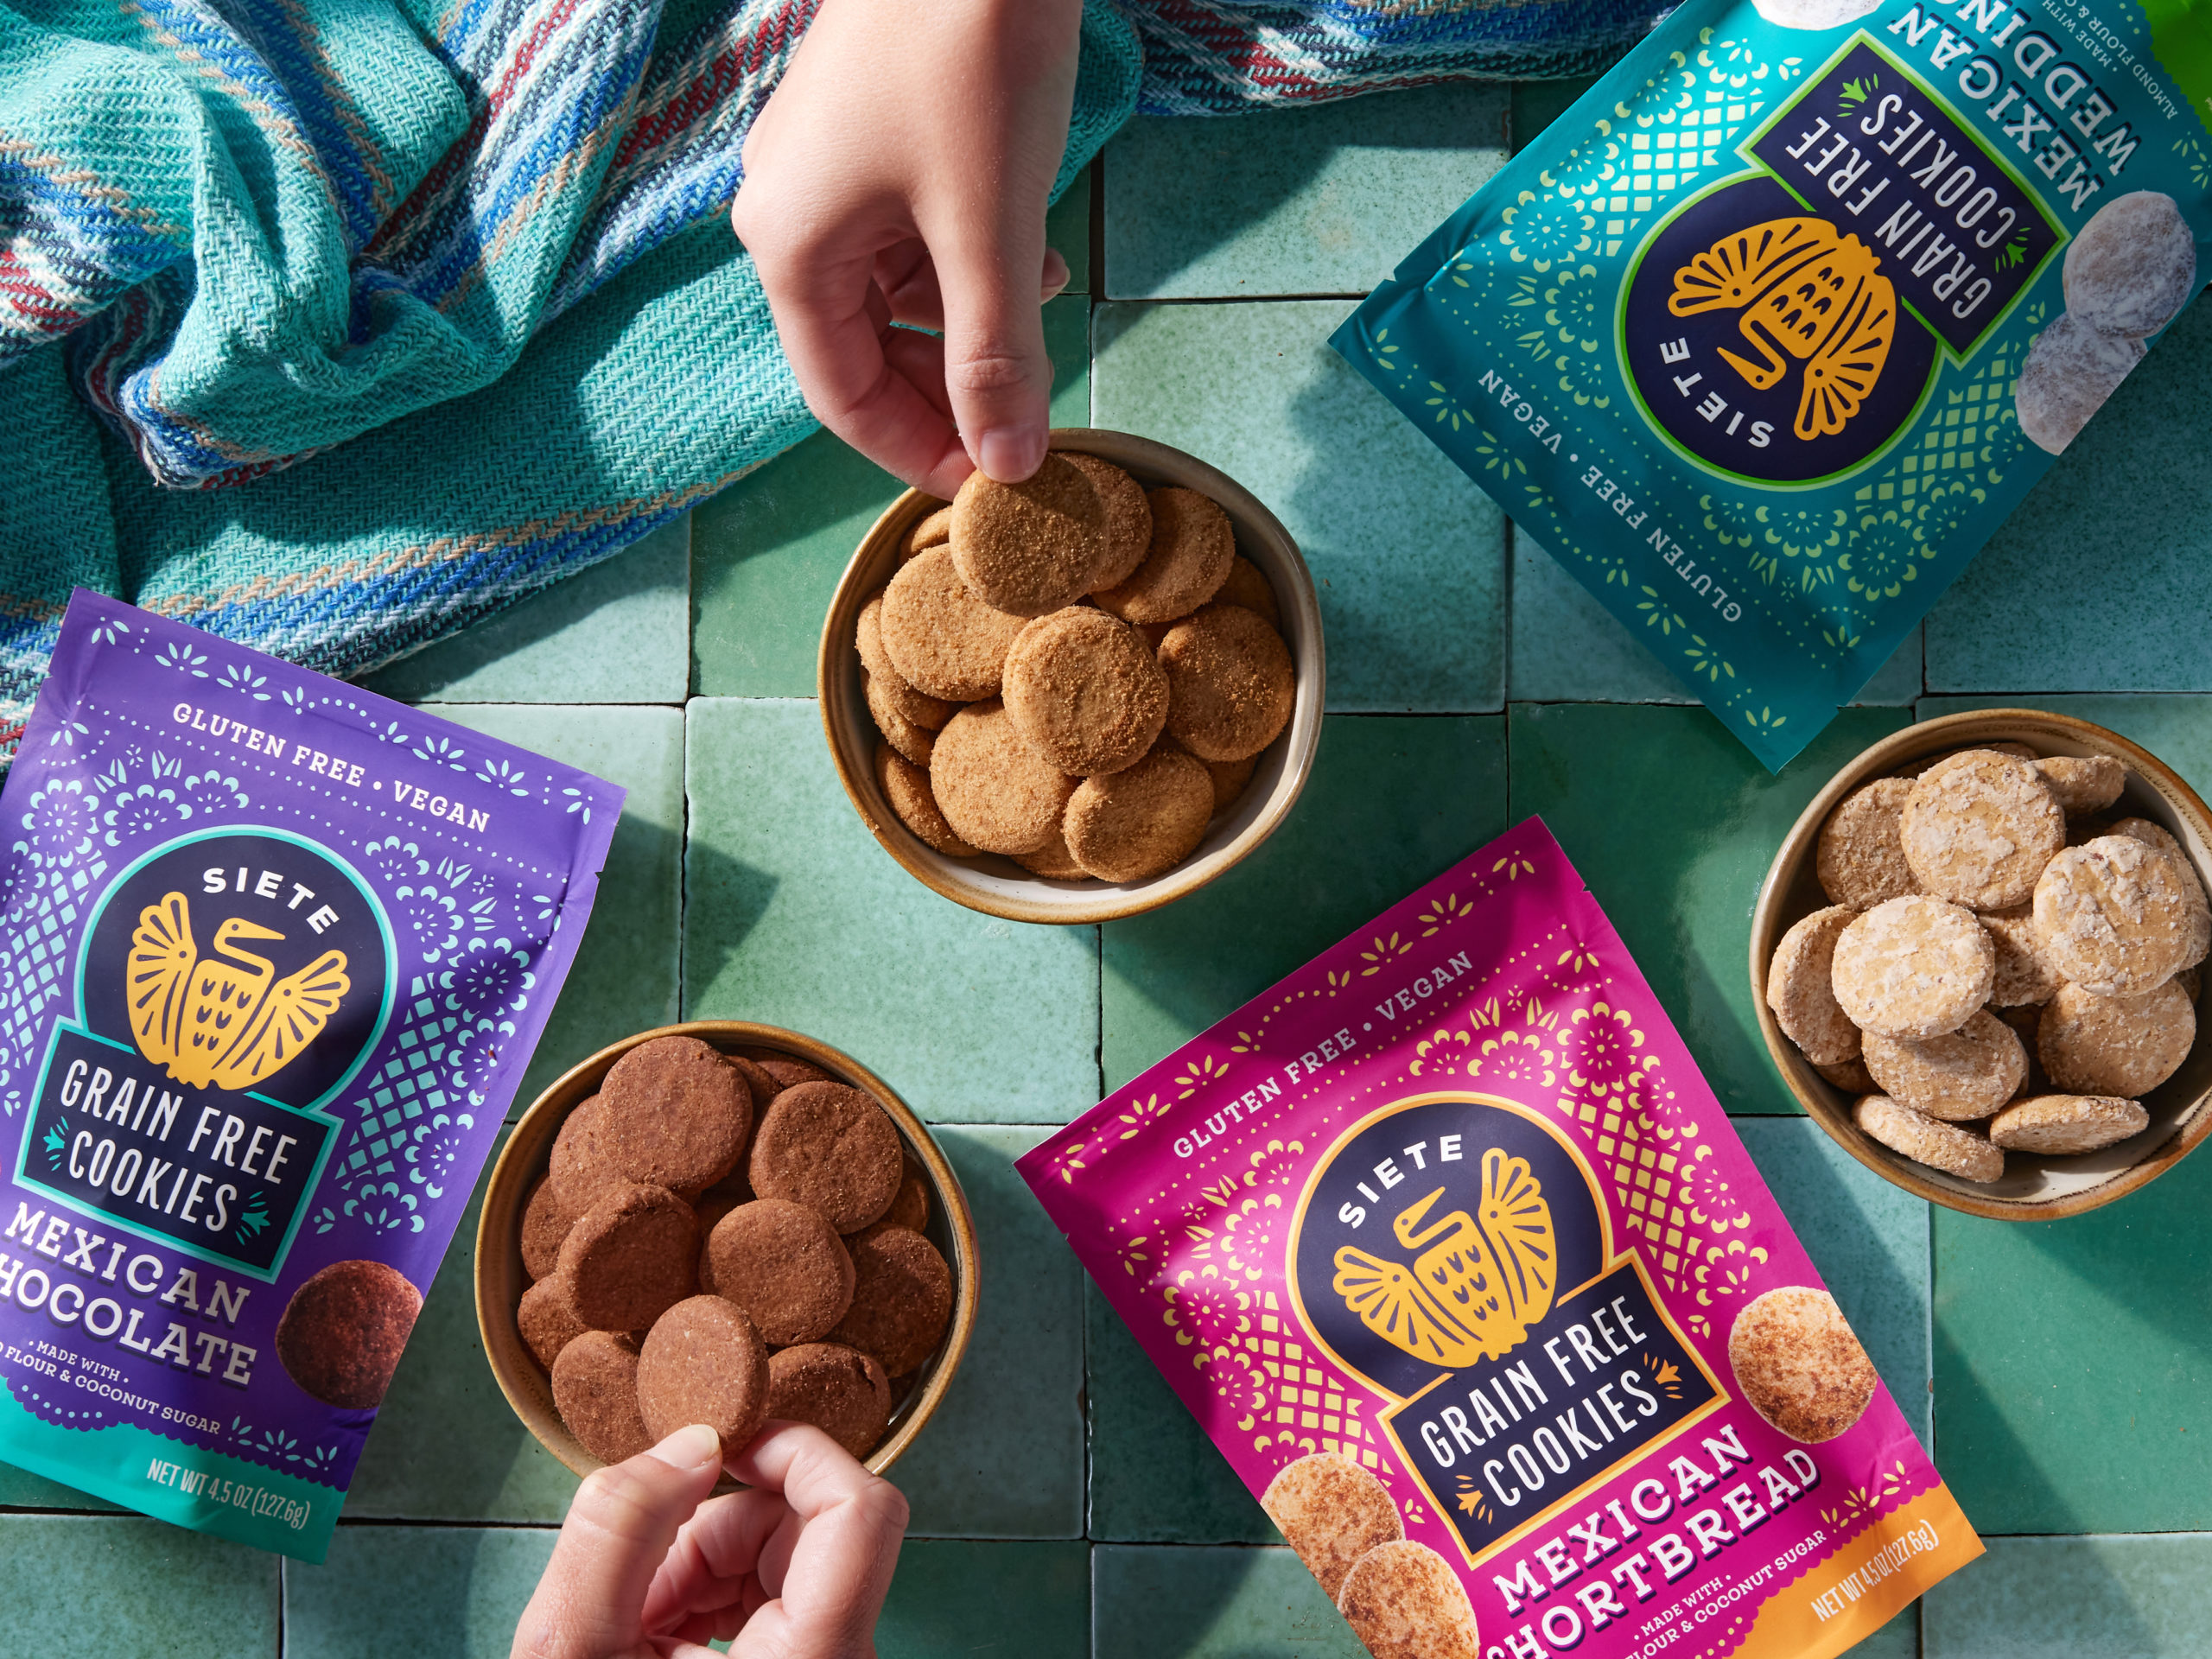 Celebrate With 2/$7 On Siete Grain Free Mexican Cookies 4/18-5/8 on I Heart Publix